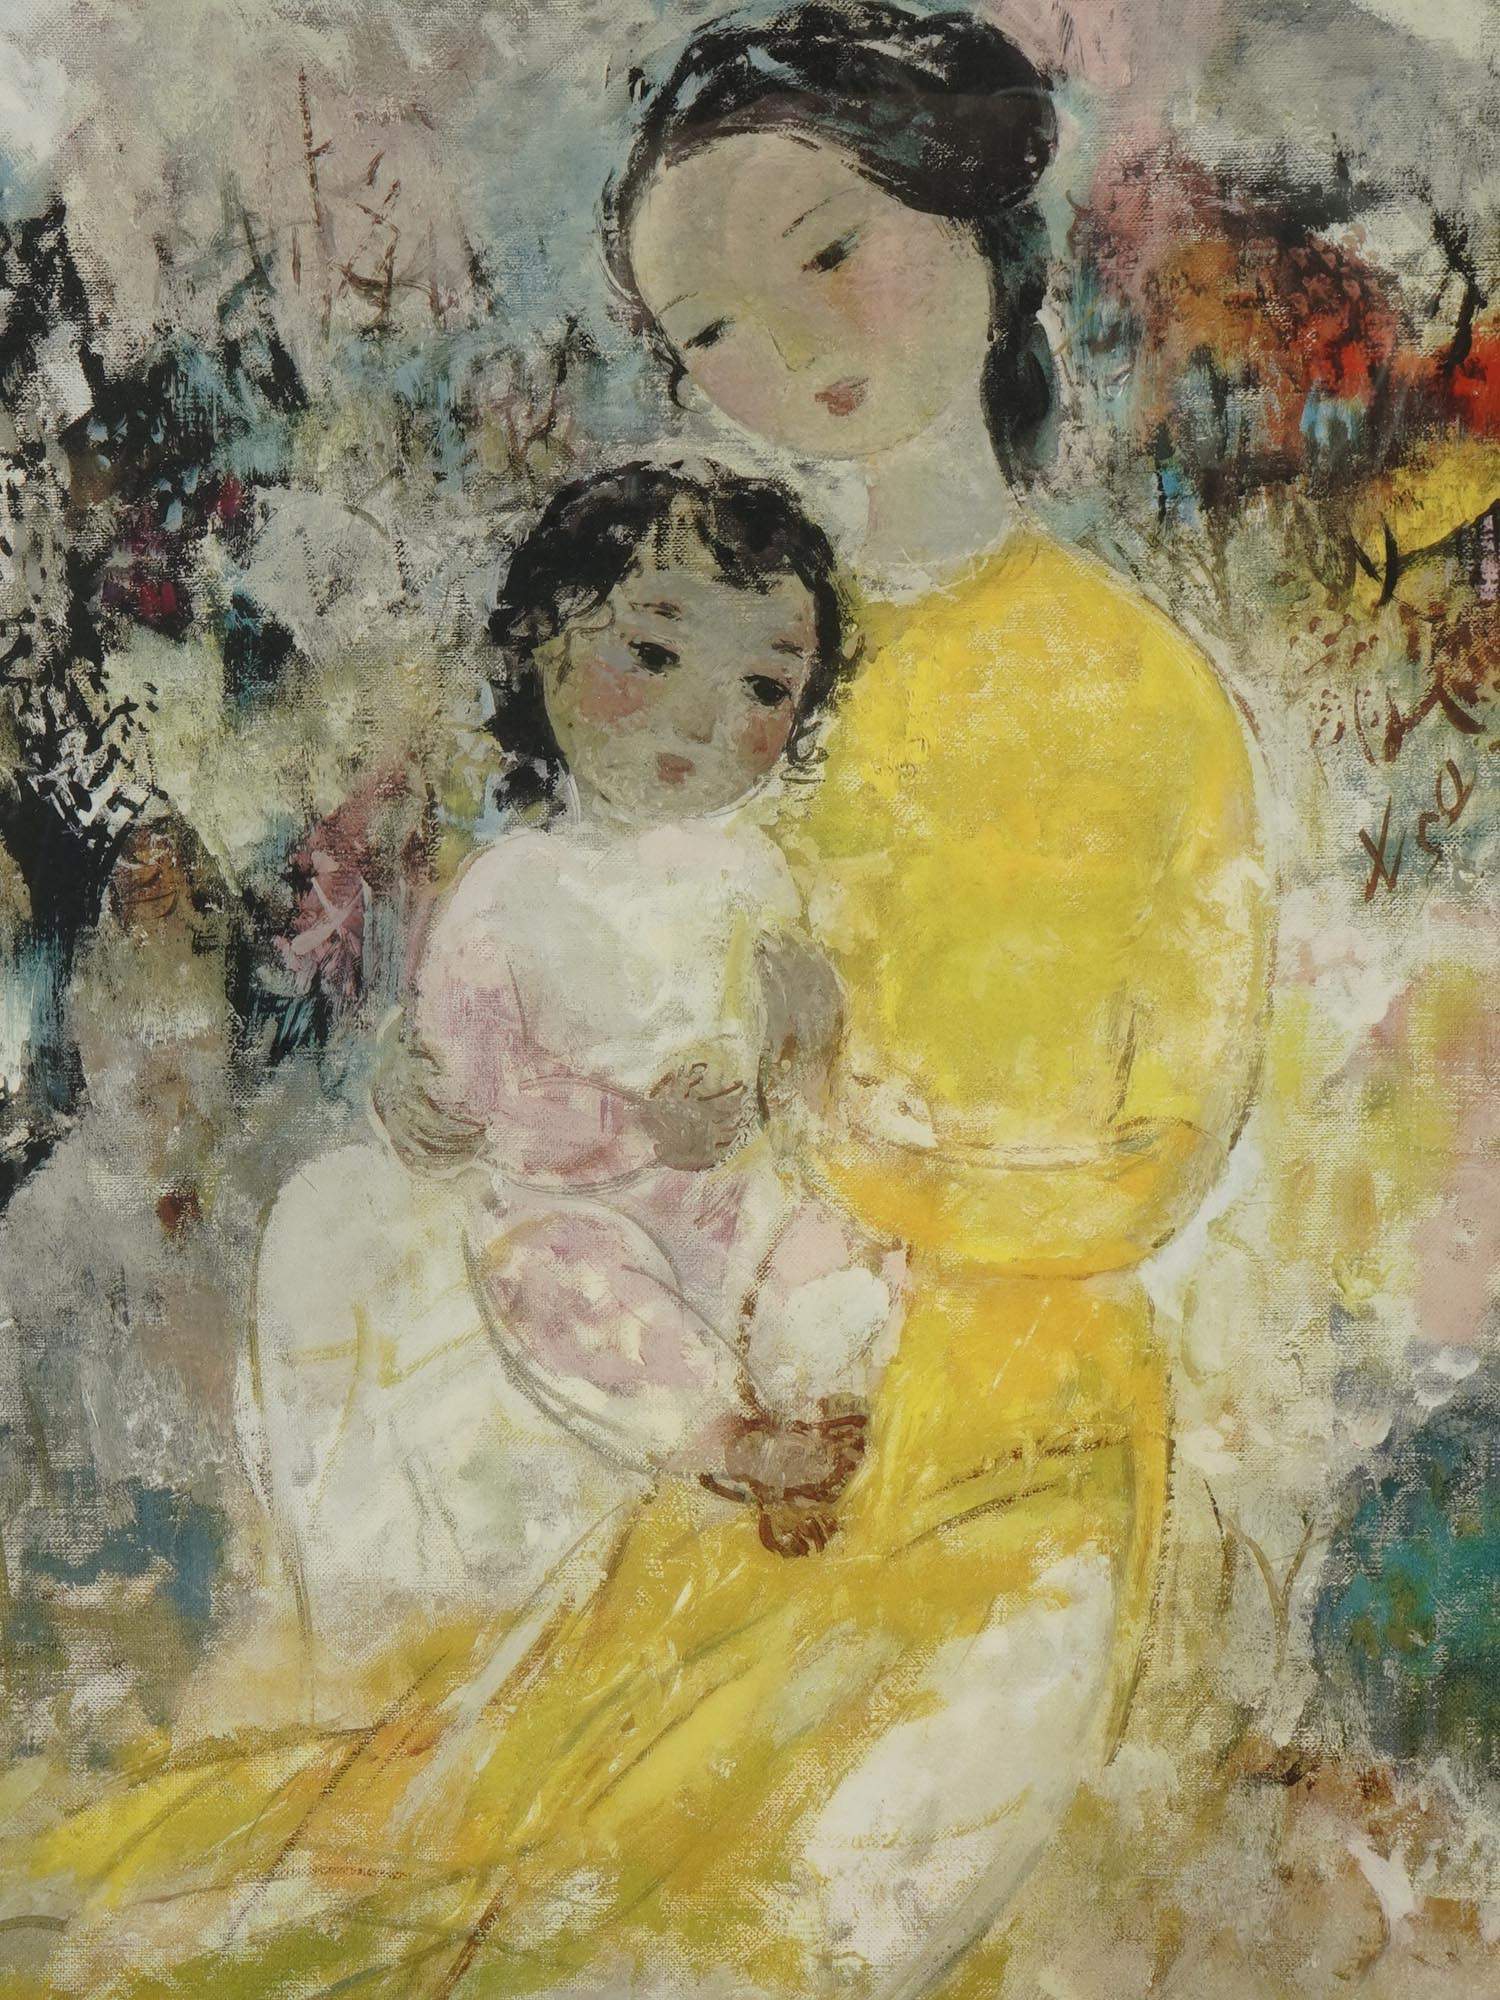 MOTHER AND CHILD COLOR LITHOGRAPH AFTER VU CAO DAM PIC-1